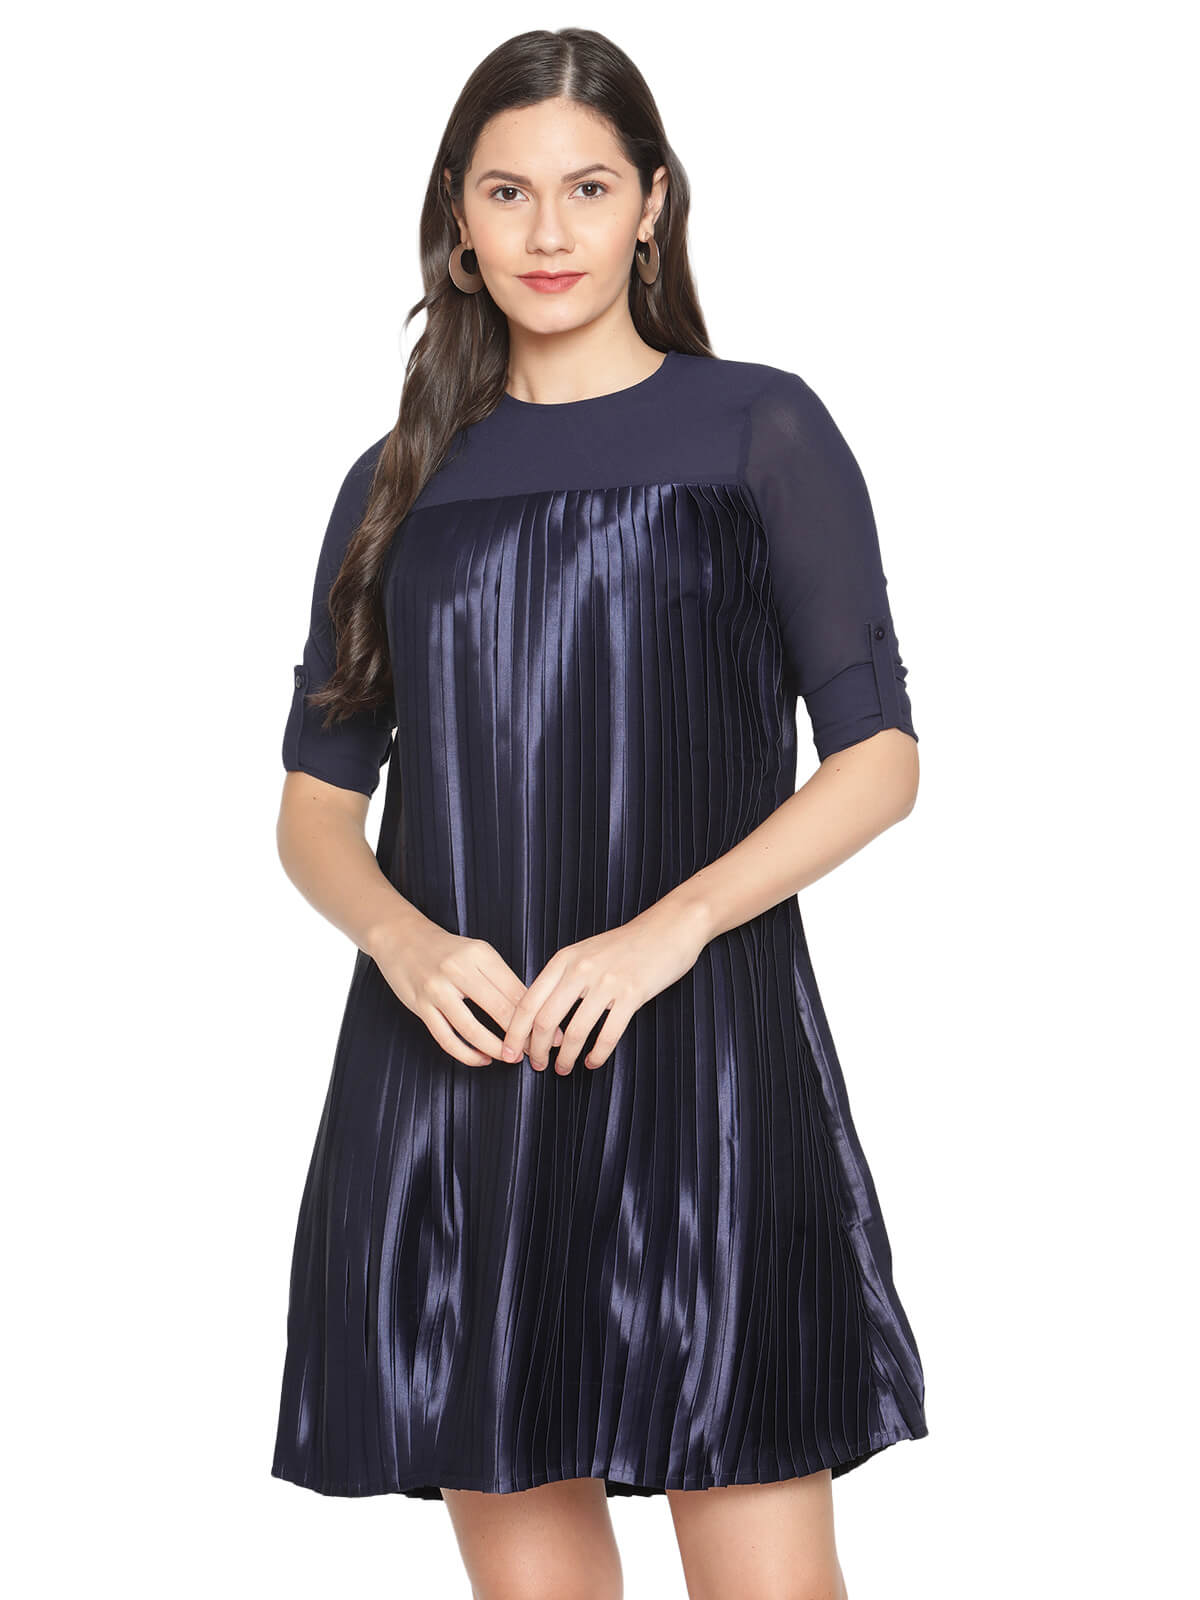 Ggt Pleated Dress